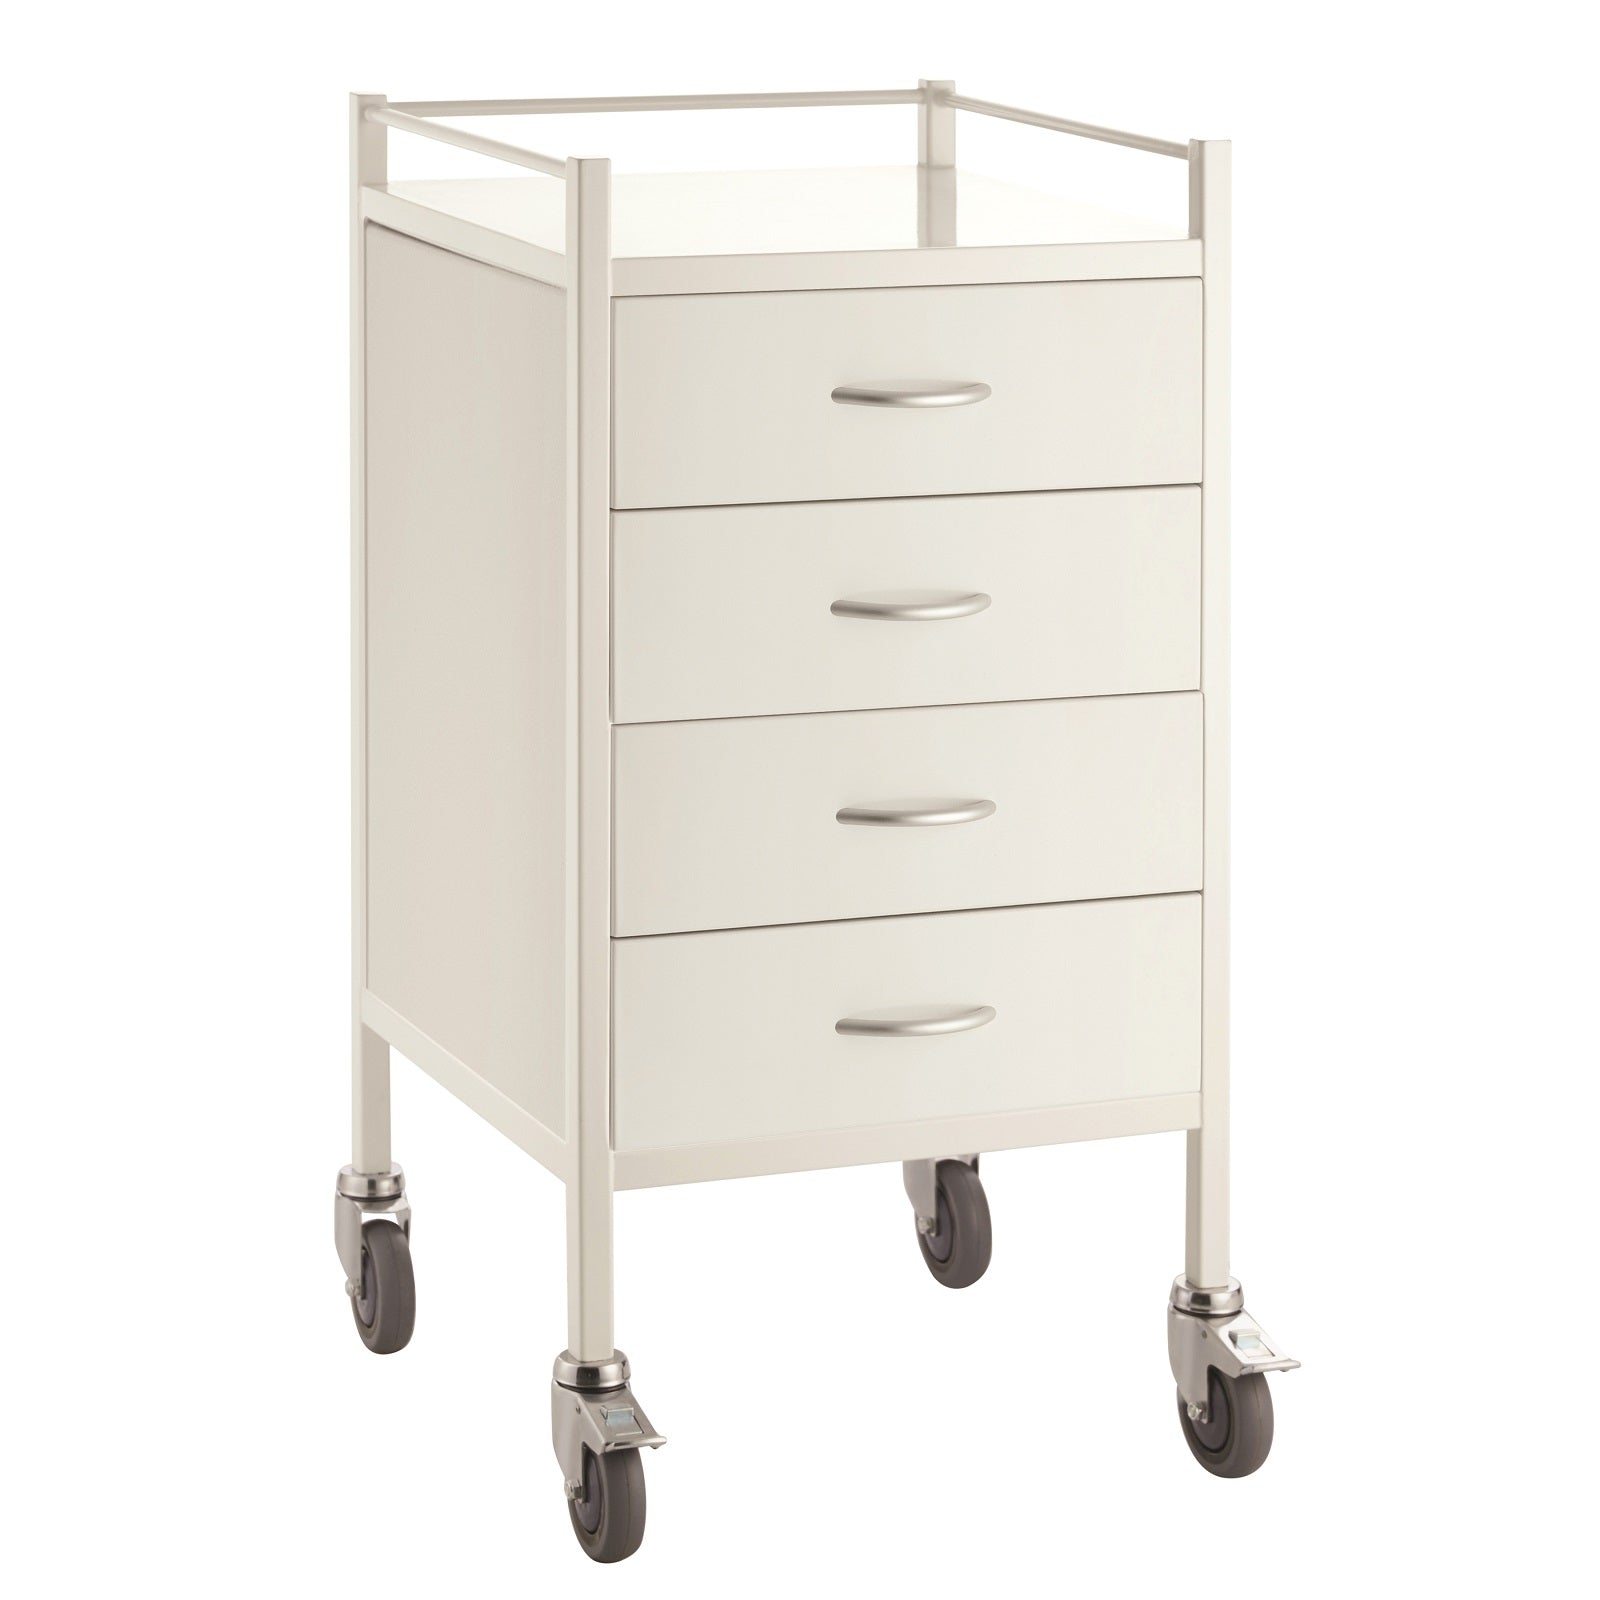 With smooth castors and an outstanding finish our four drawer powder coated trolley is a great alternative to stainless.